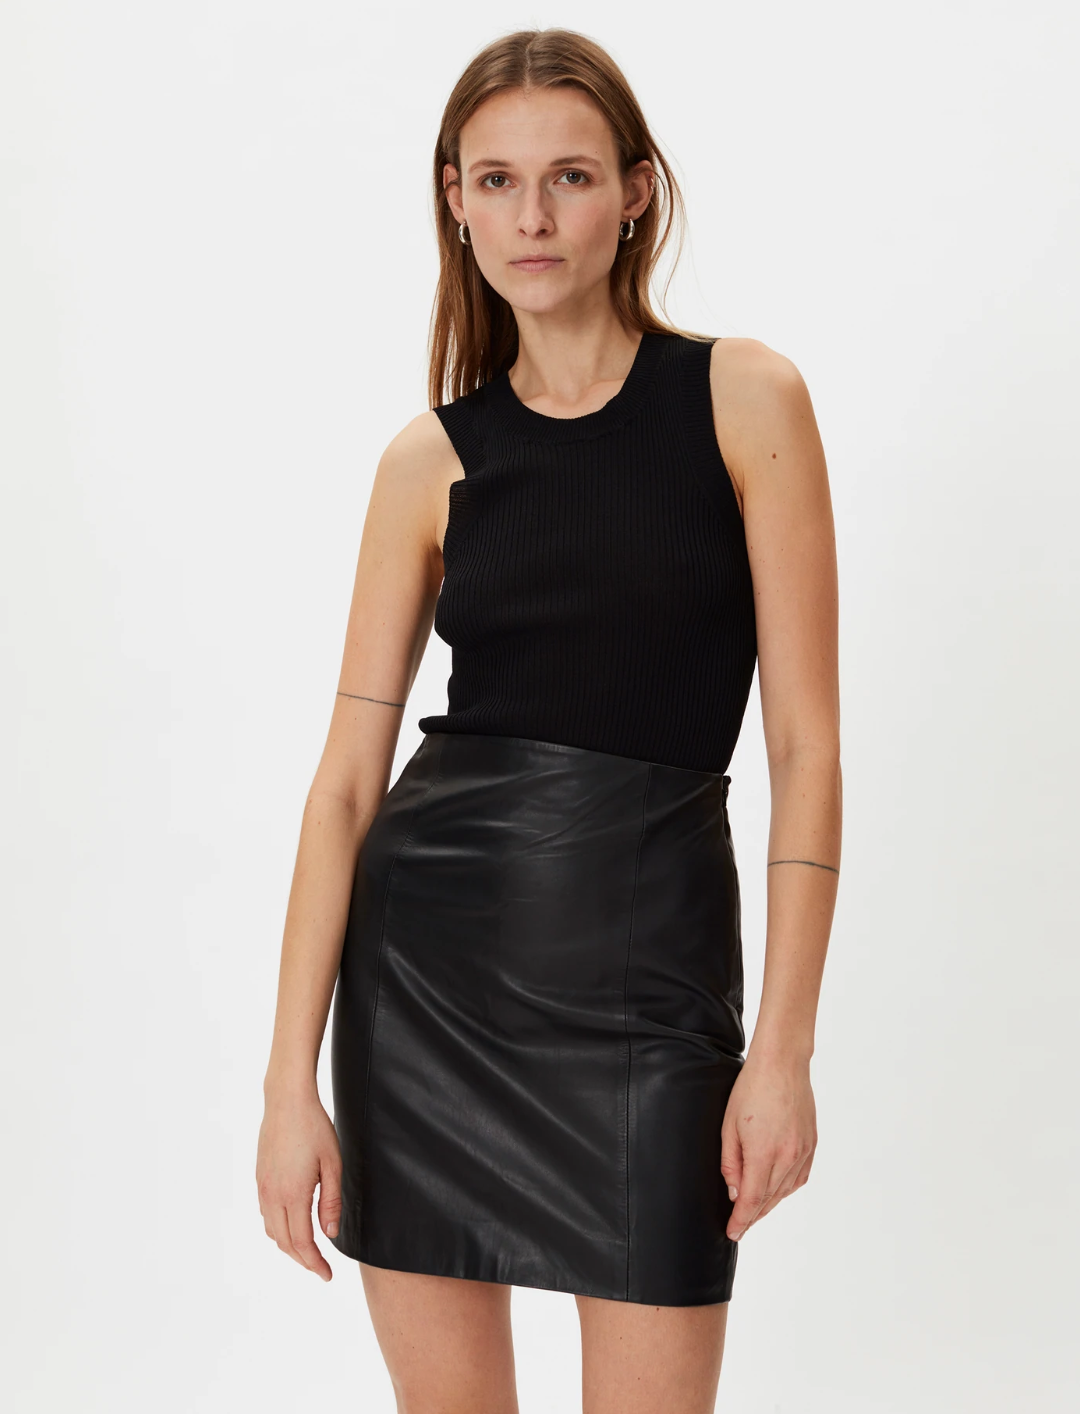 Electra leather skirt in black